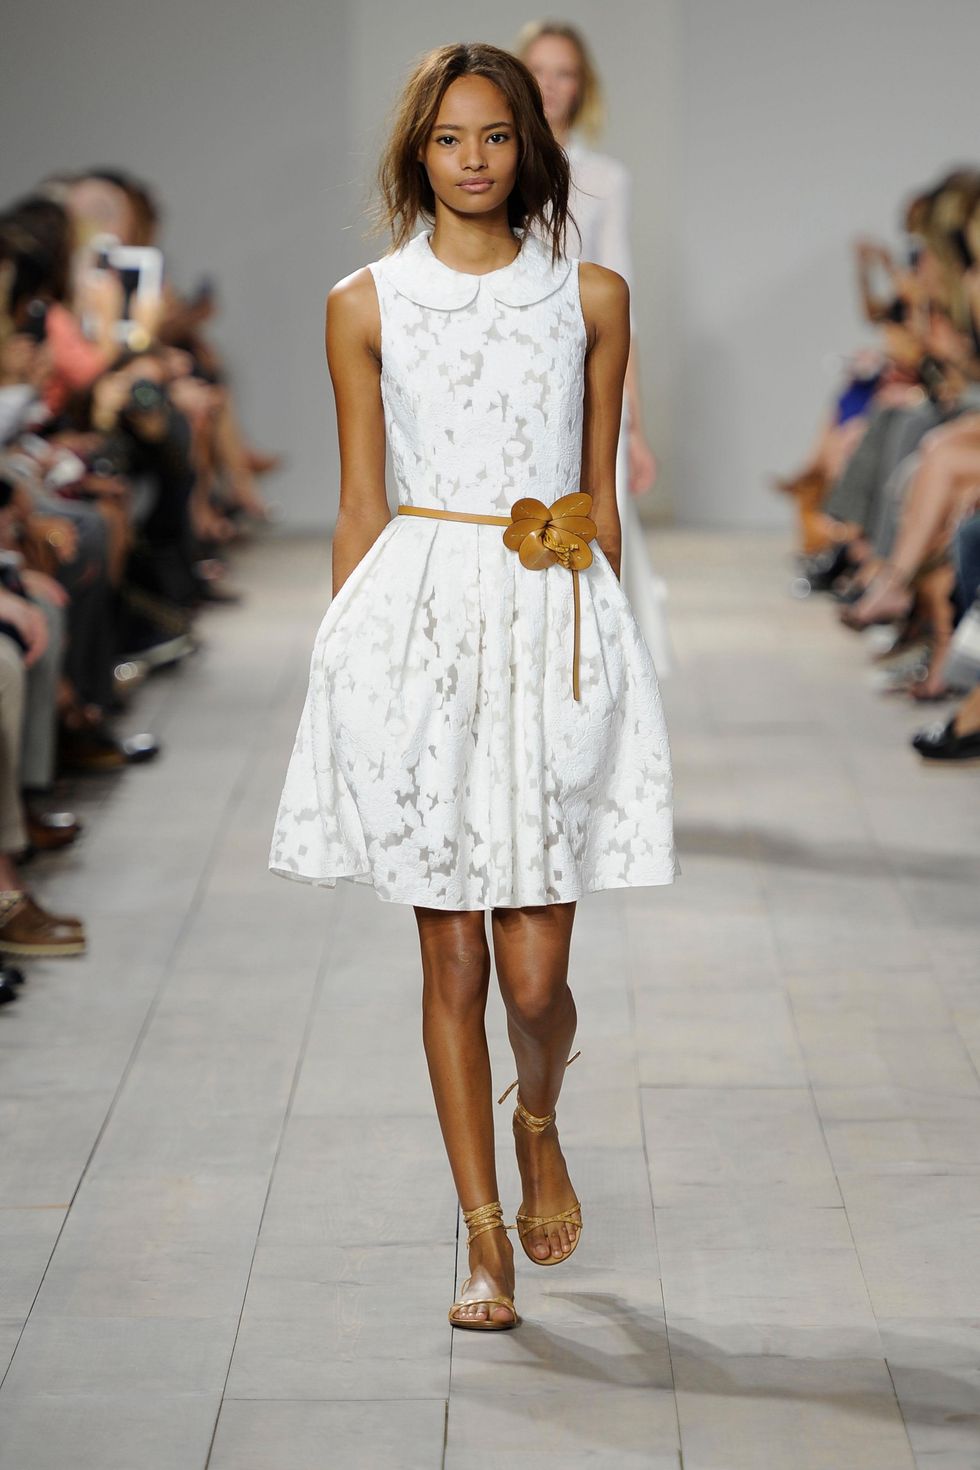 Michael Kors spring 2015 look 3 white fil coupe dress